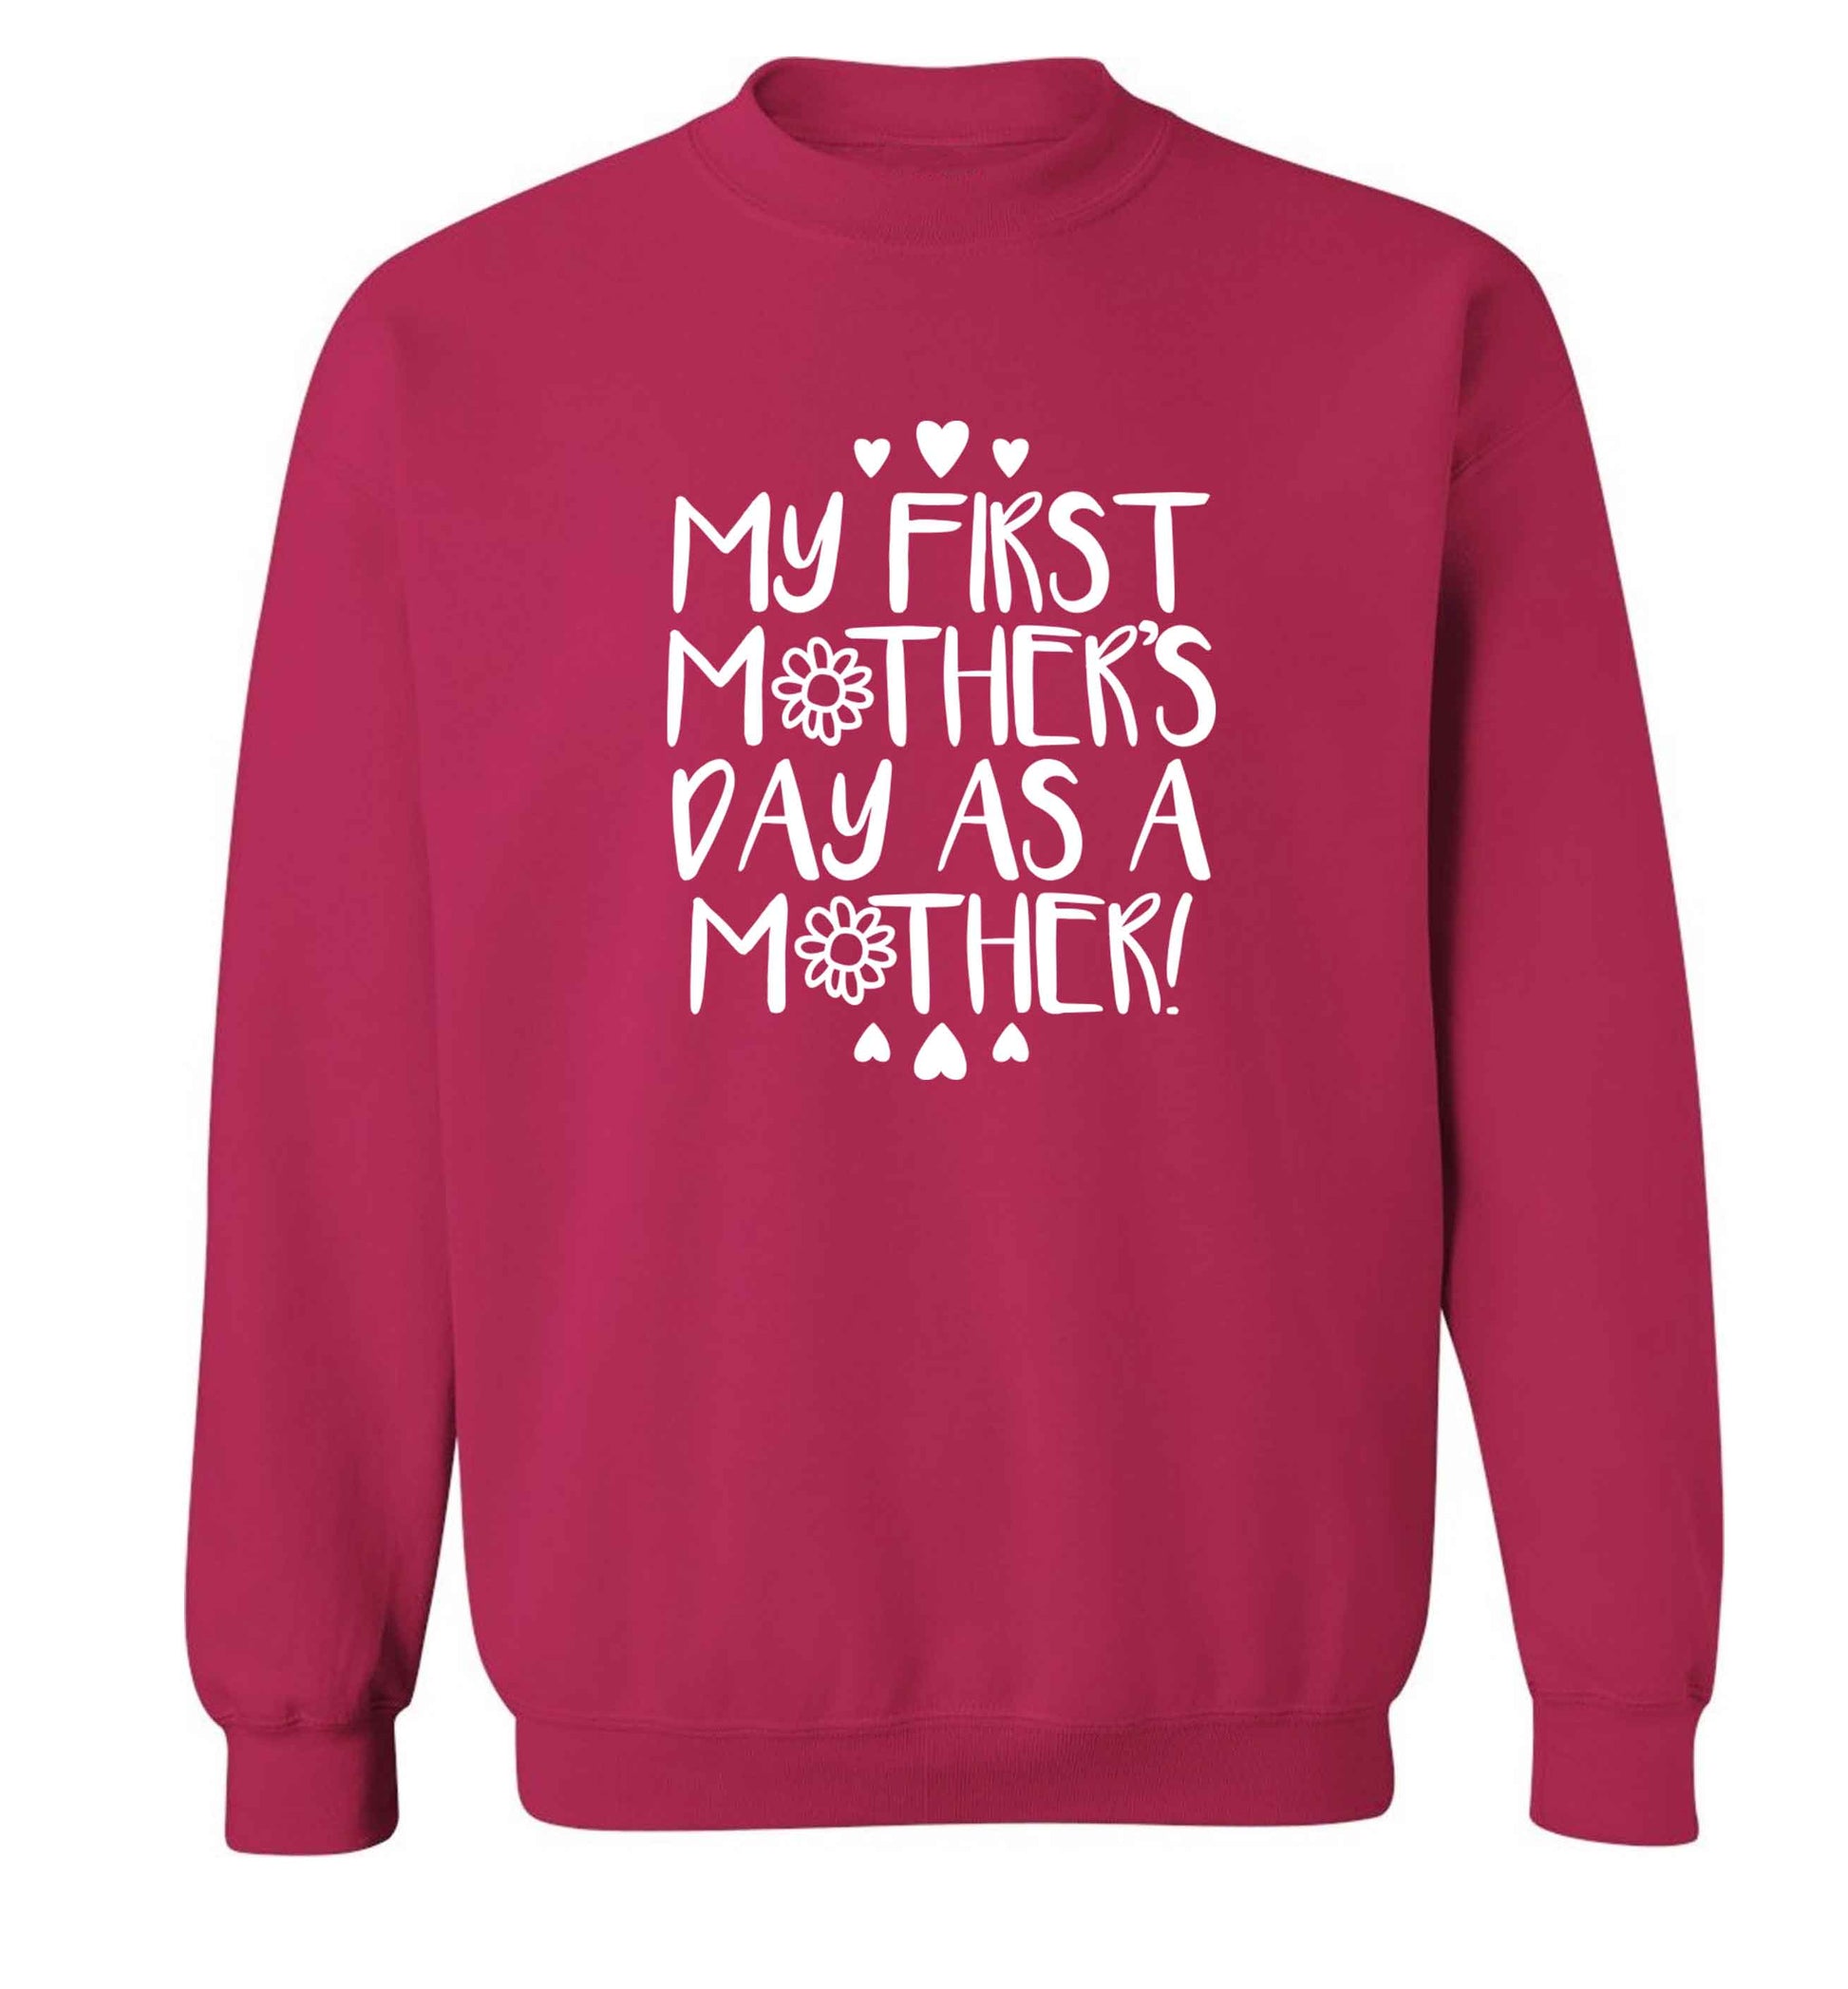 It's my first mother's day as a mother adult's unisex pink sweater 2XL